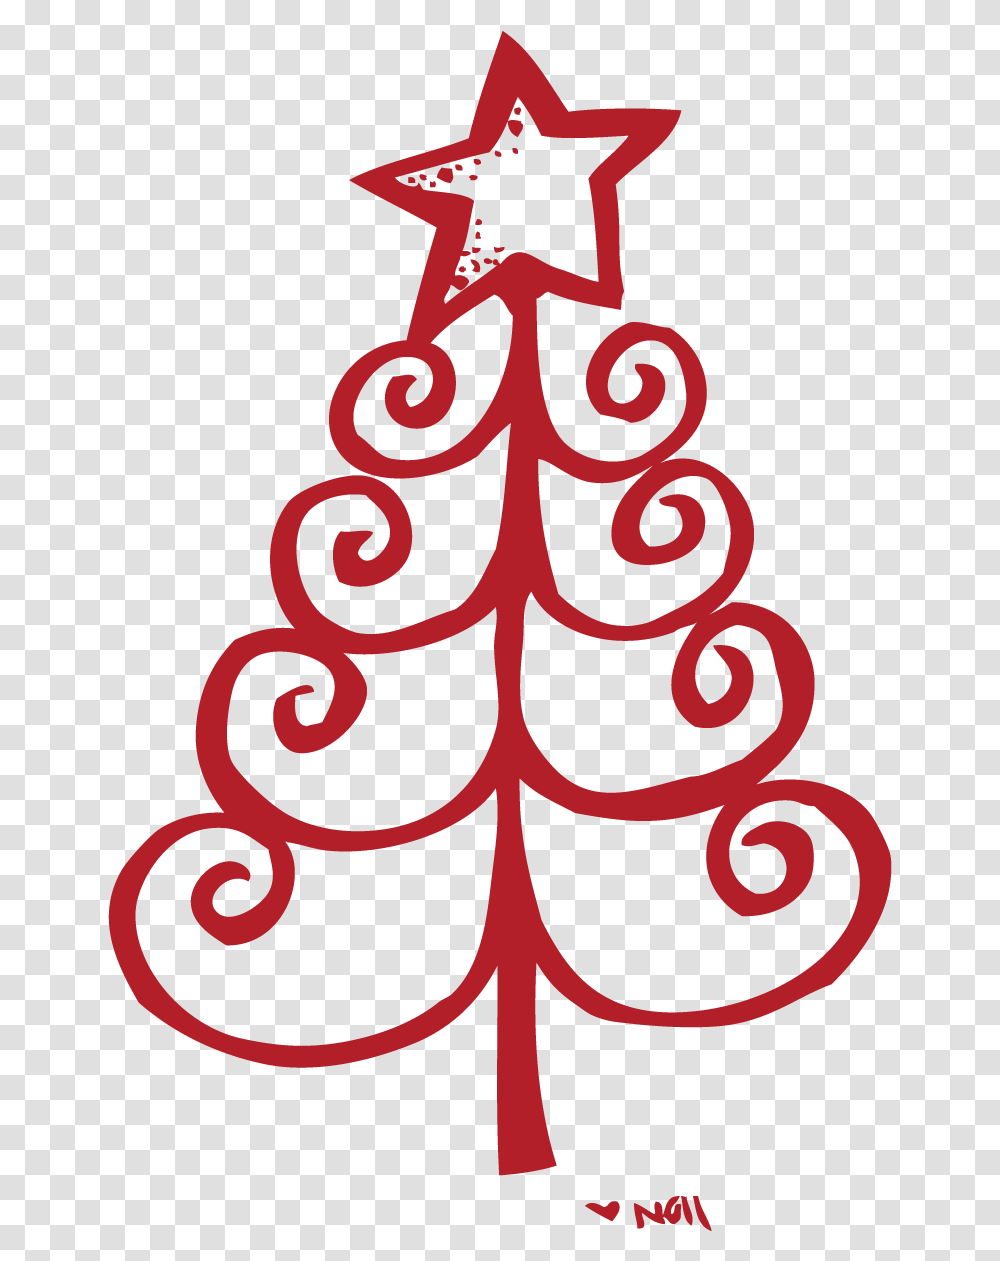 Christmas Tree Clipart Top Border Whimsical Christmas Tree Clip Art, Ornament, Plant, Pattern Transparent Png